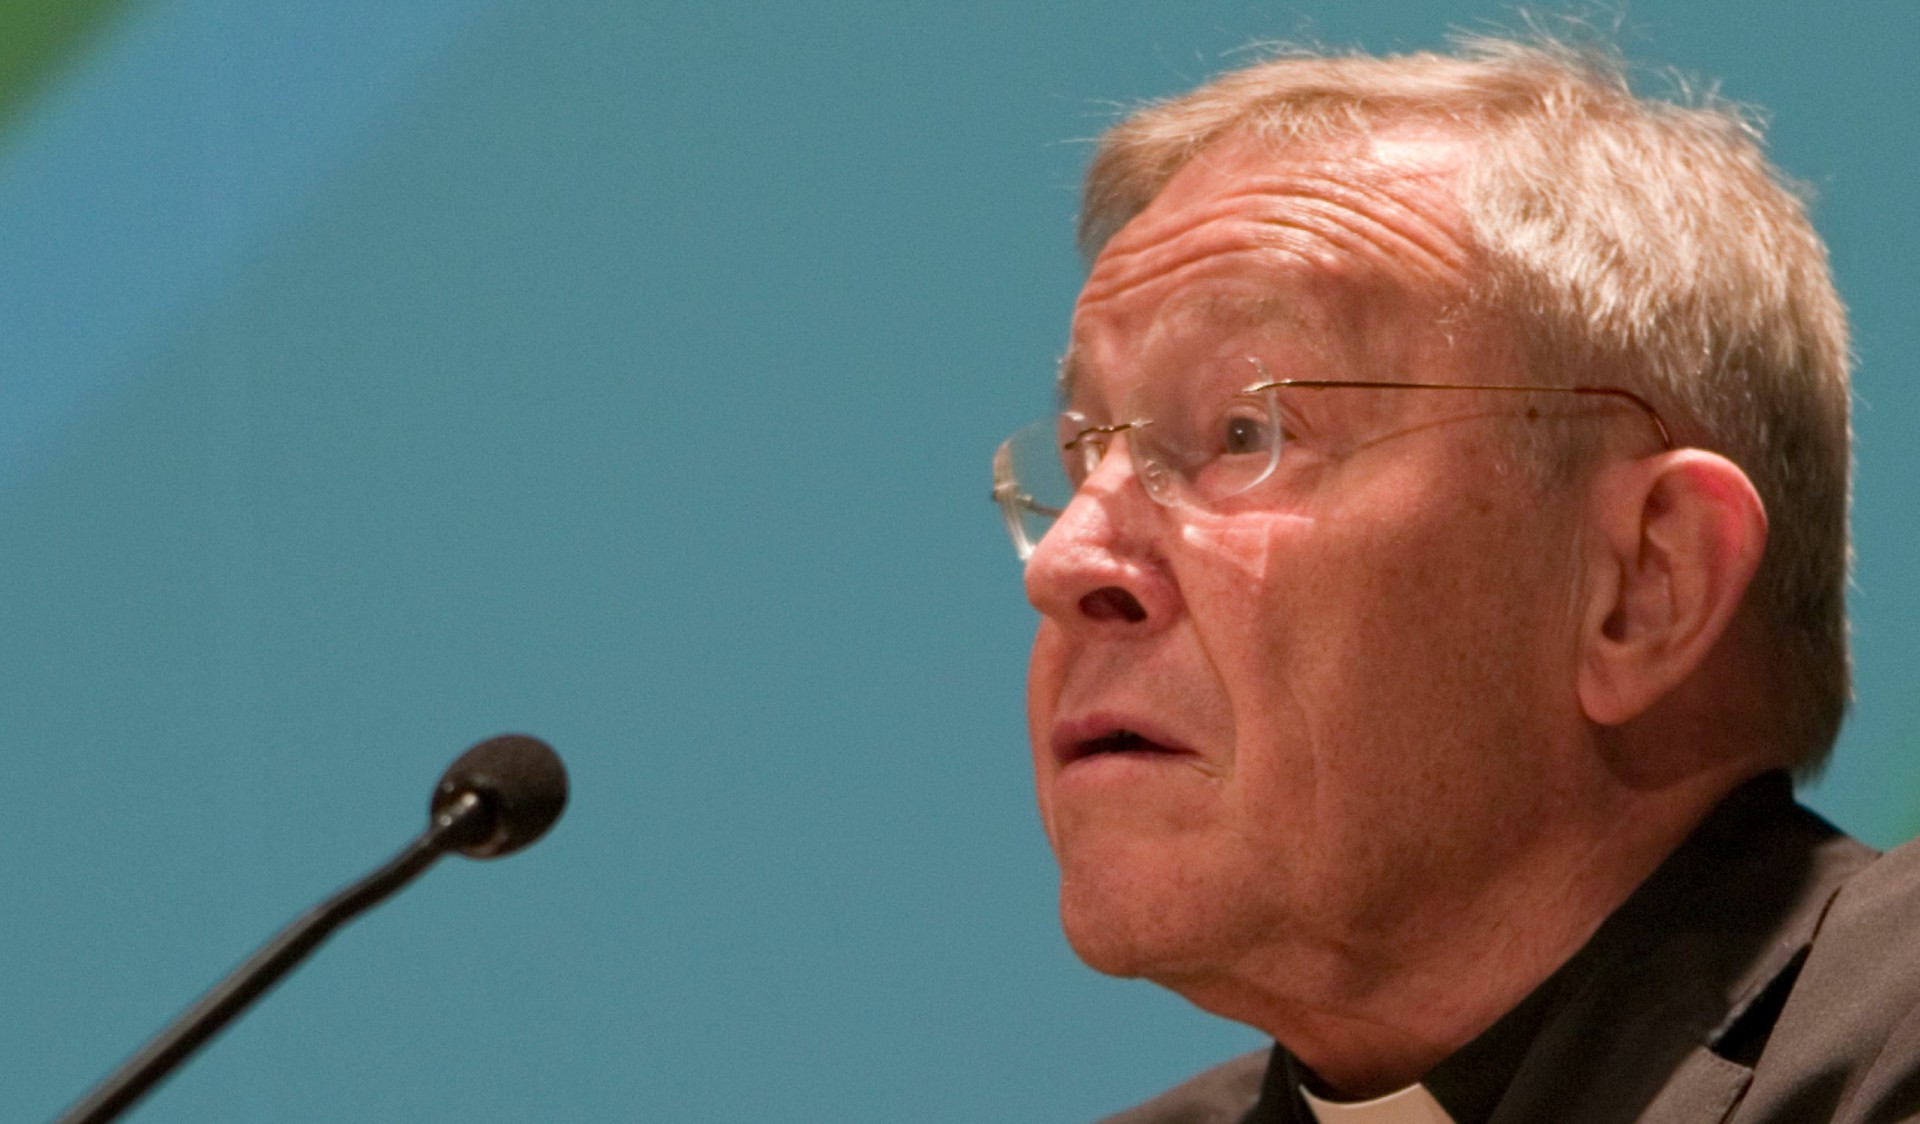 Le cardinal Walter Kasper (Photo:The Lutheran World Federation/Flickr/CC BY-NC-ND 2.0)